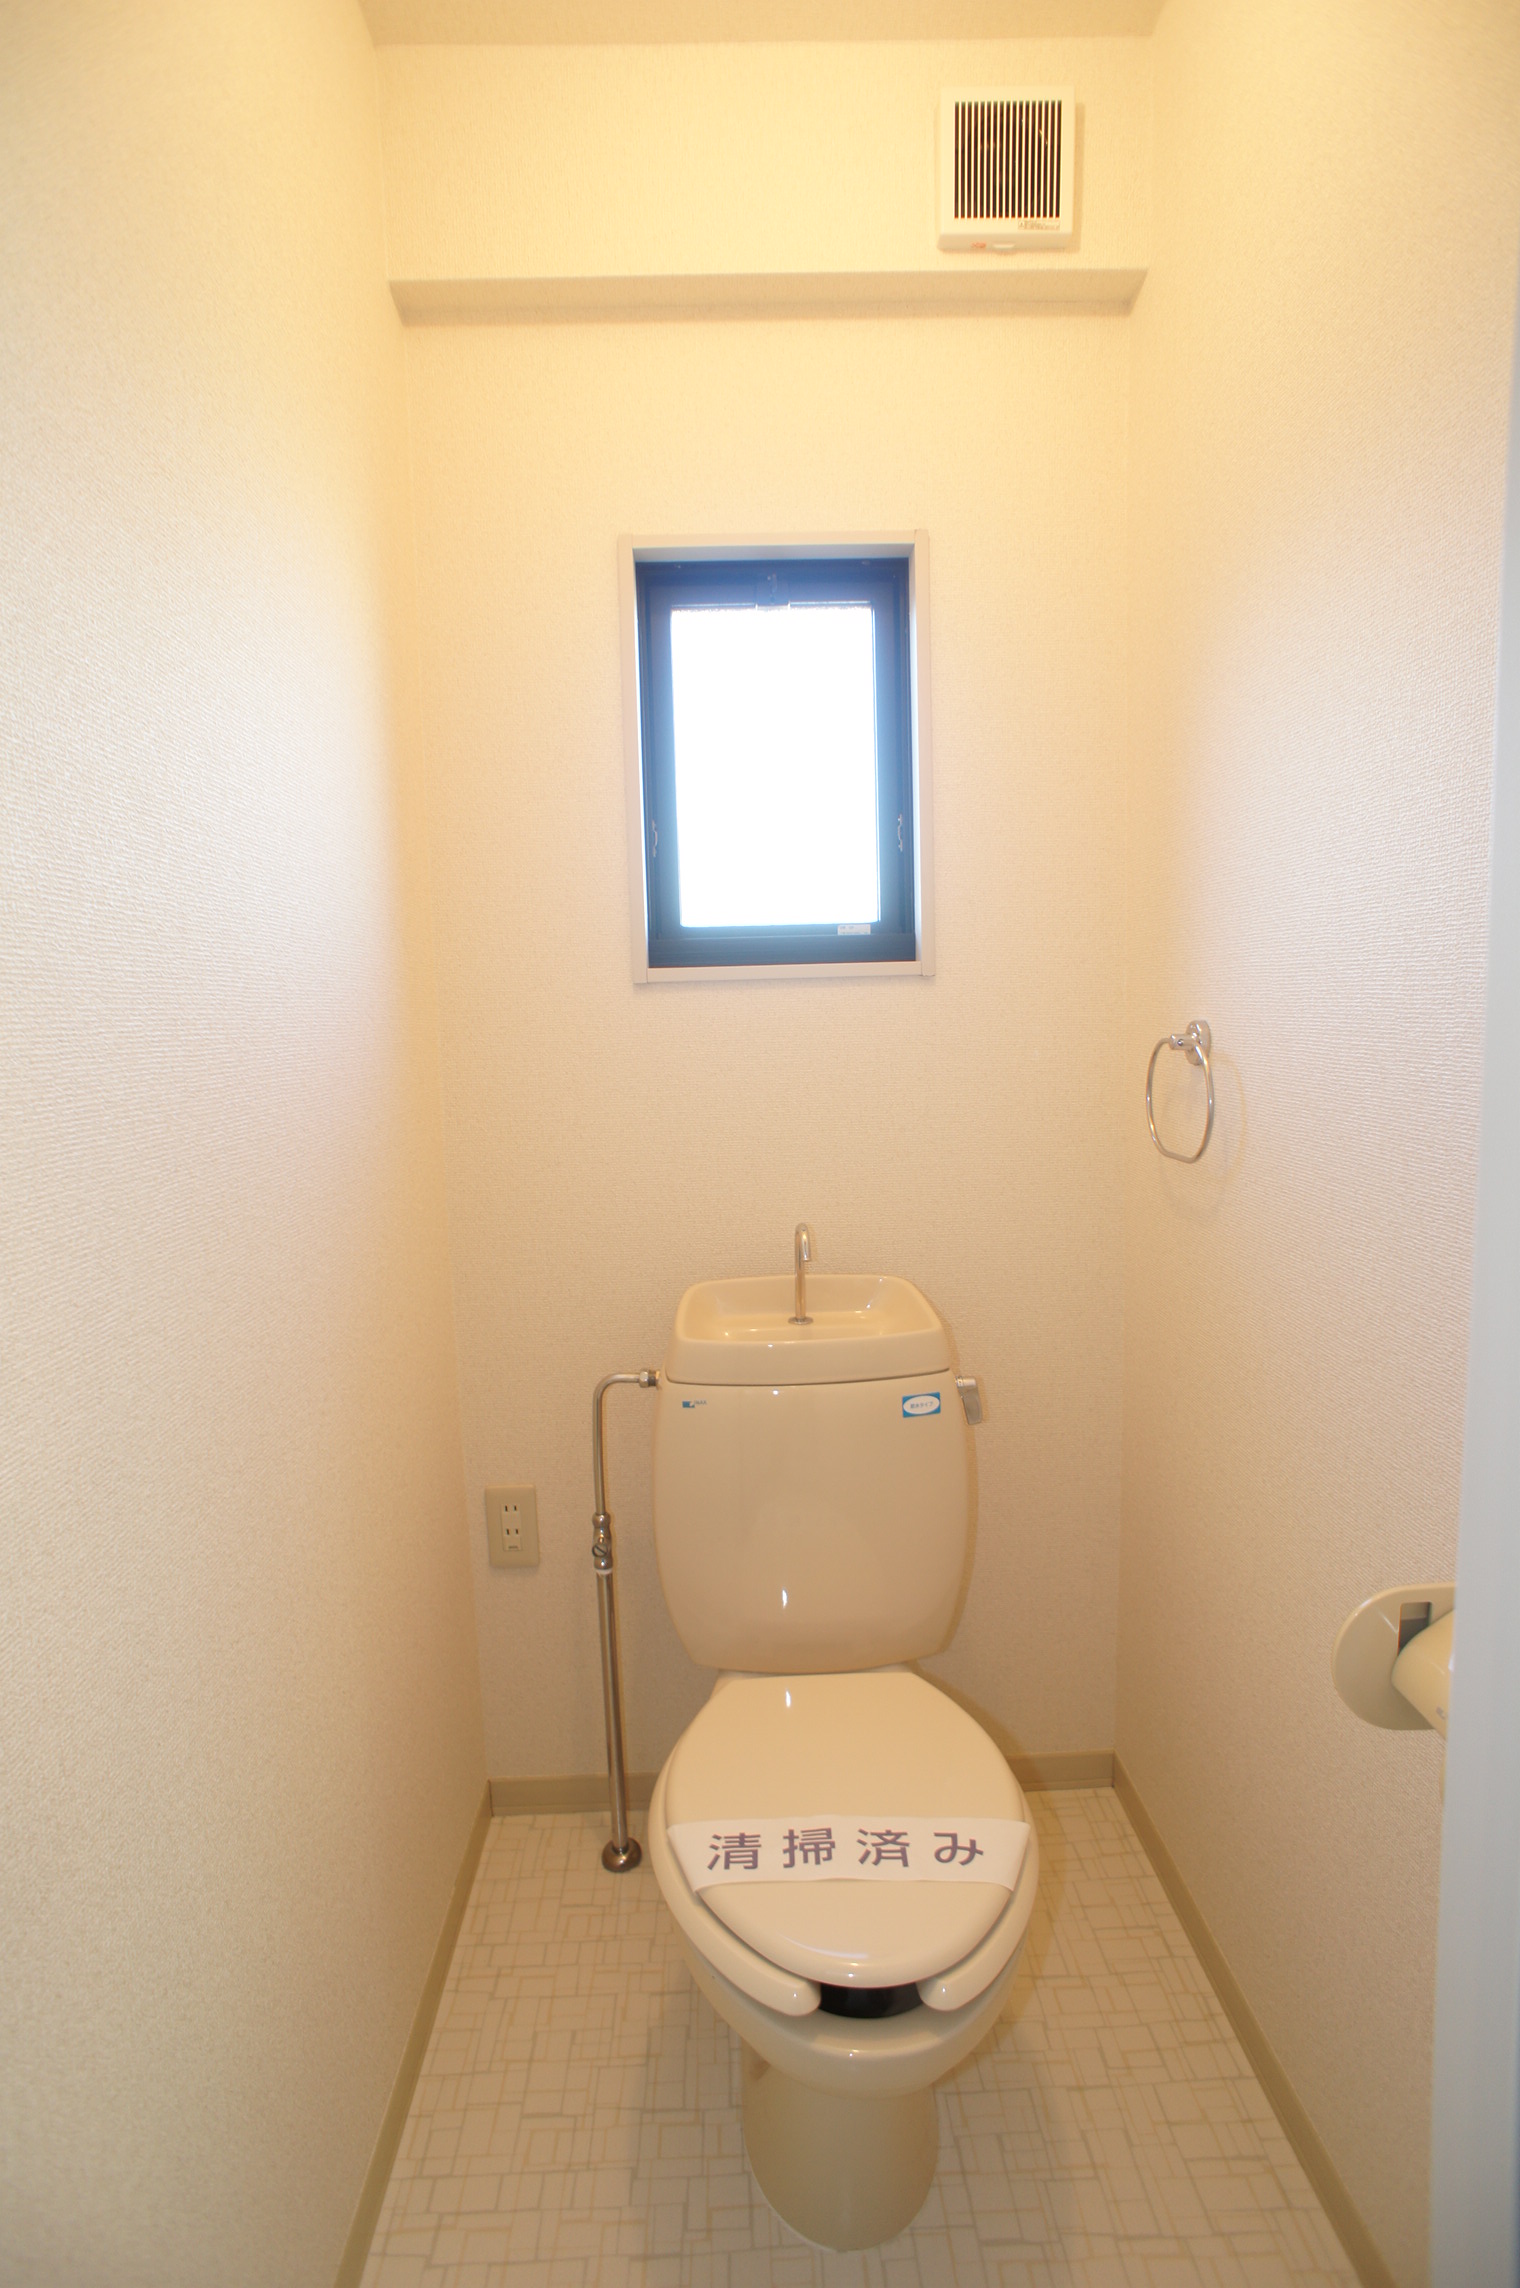 Toilet. window ・ There are outlet!